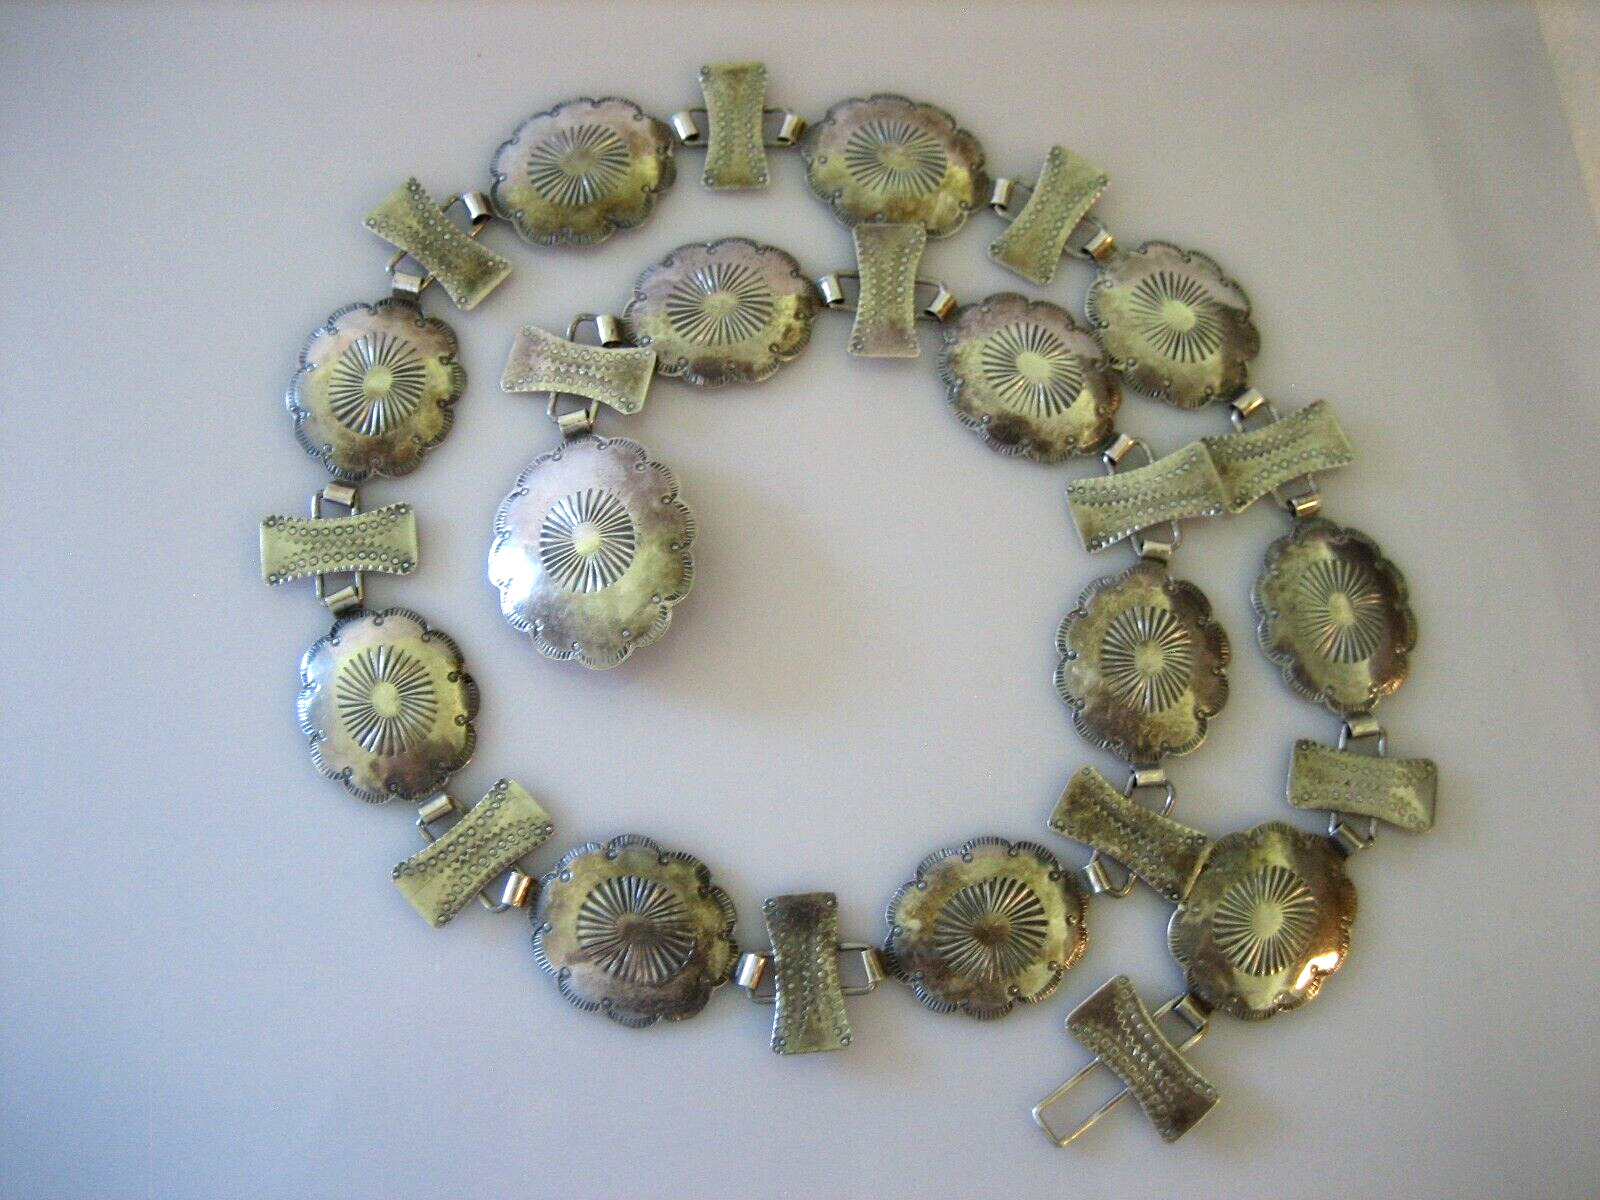 Vintage Navajo Native American Sterling Silver Stamped Concho Chain Belt 62.1 GR